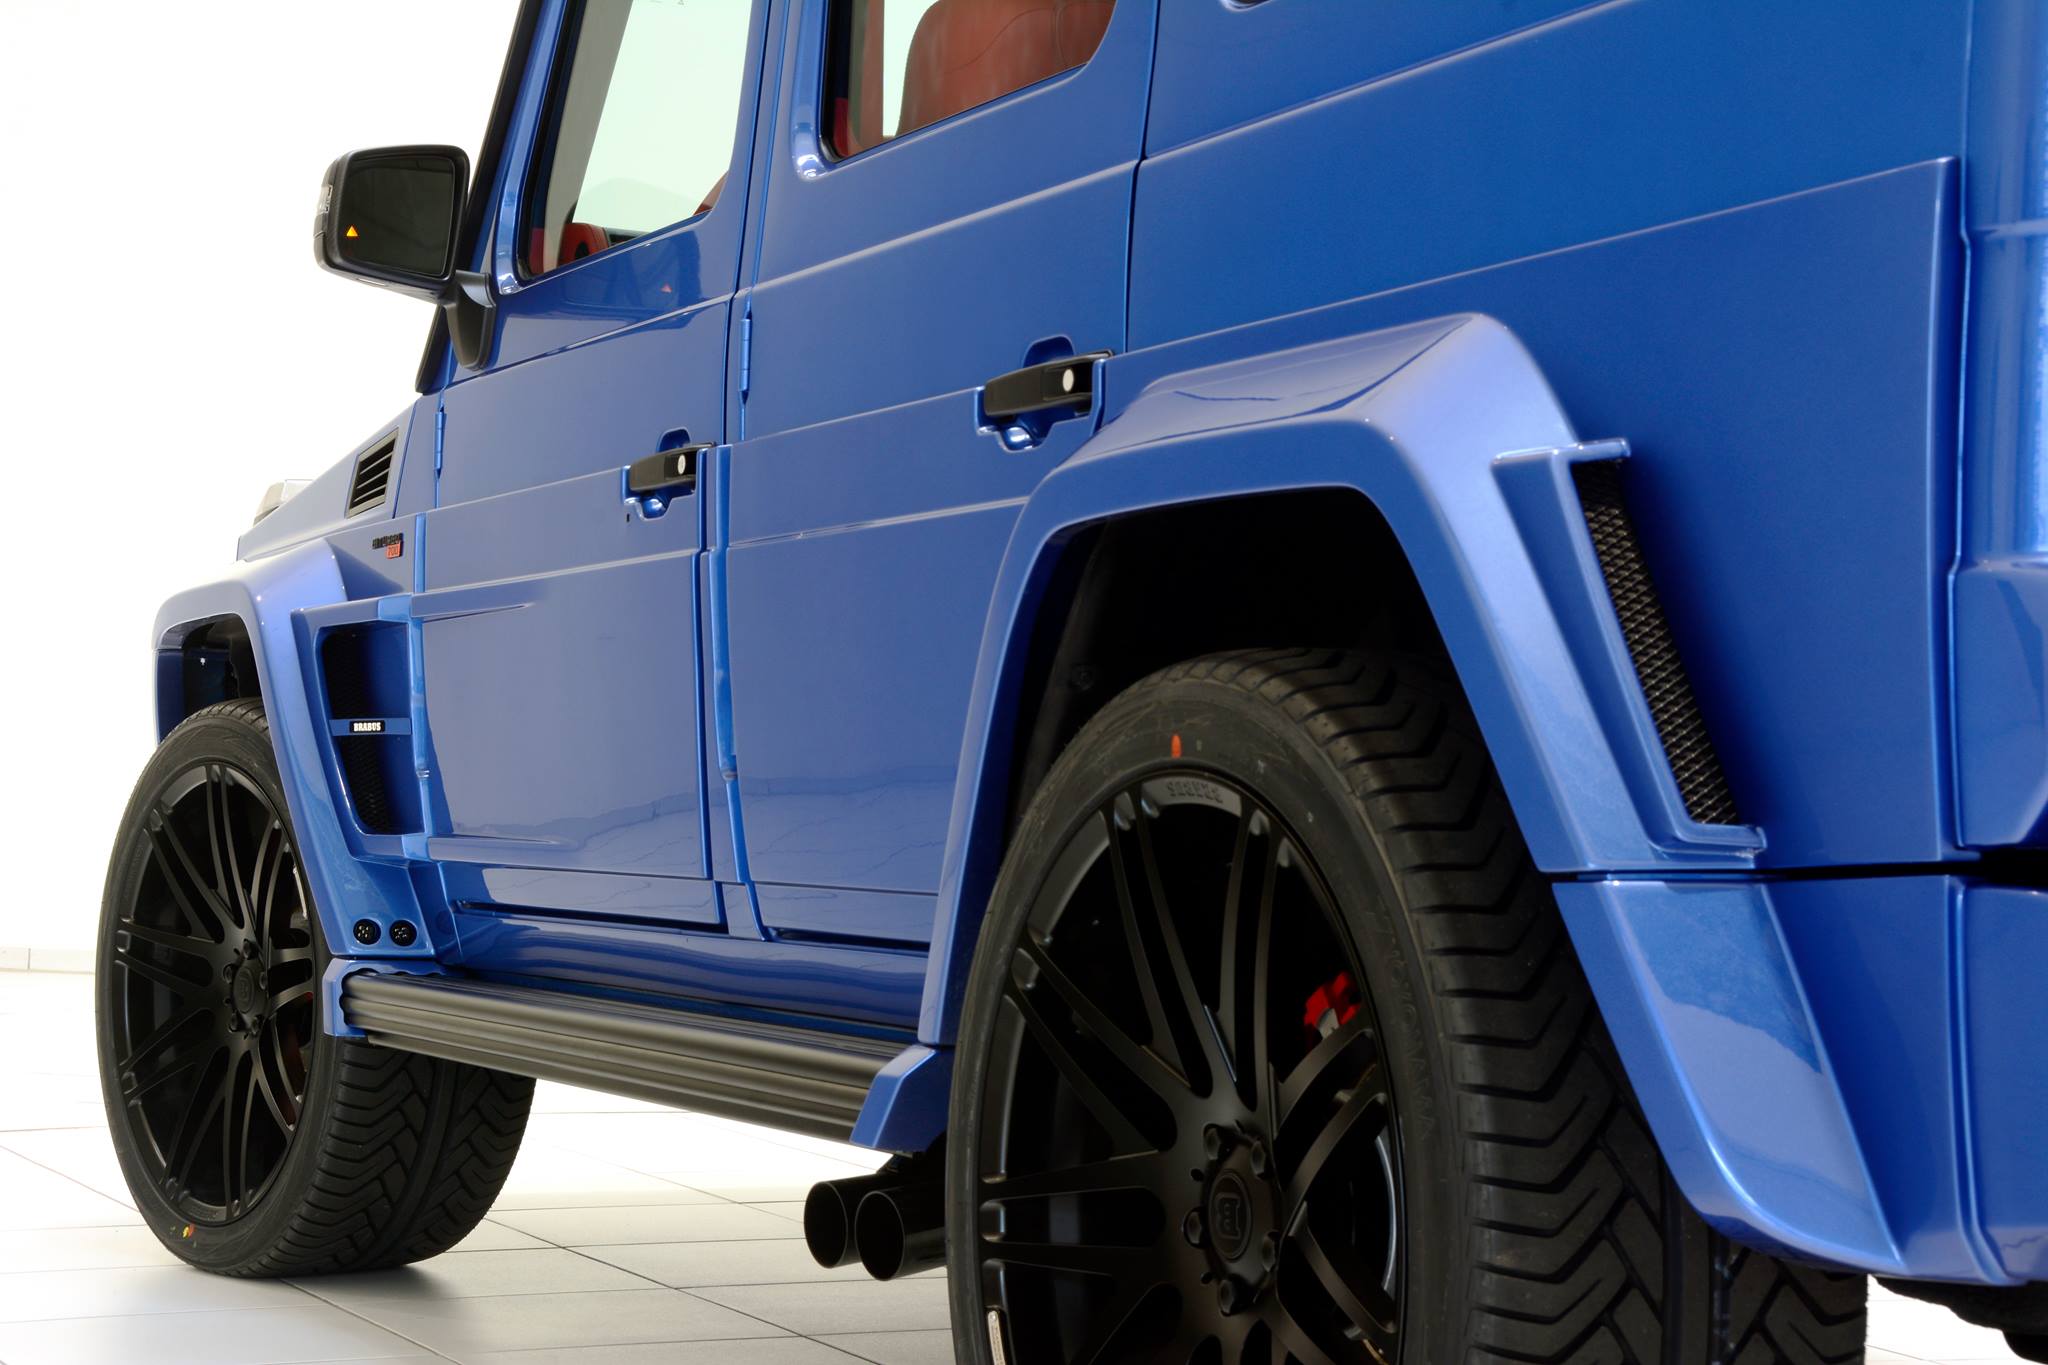 brabus-700-hp-g63-amg-combines-blue-paint-and-red-leather_2-autonovosti.me-2